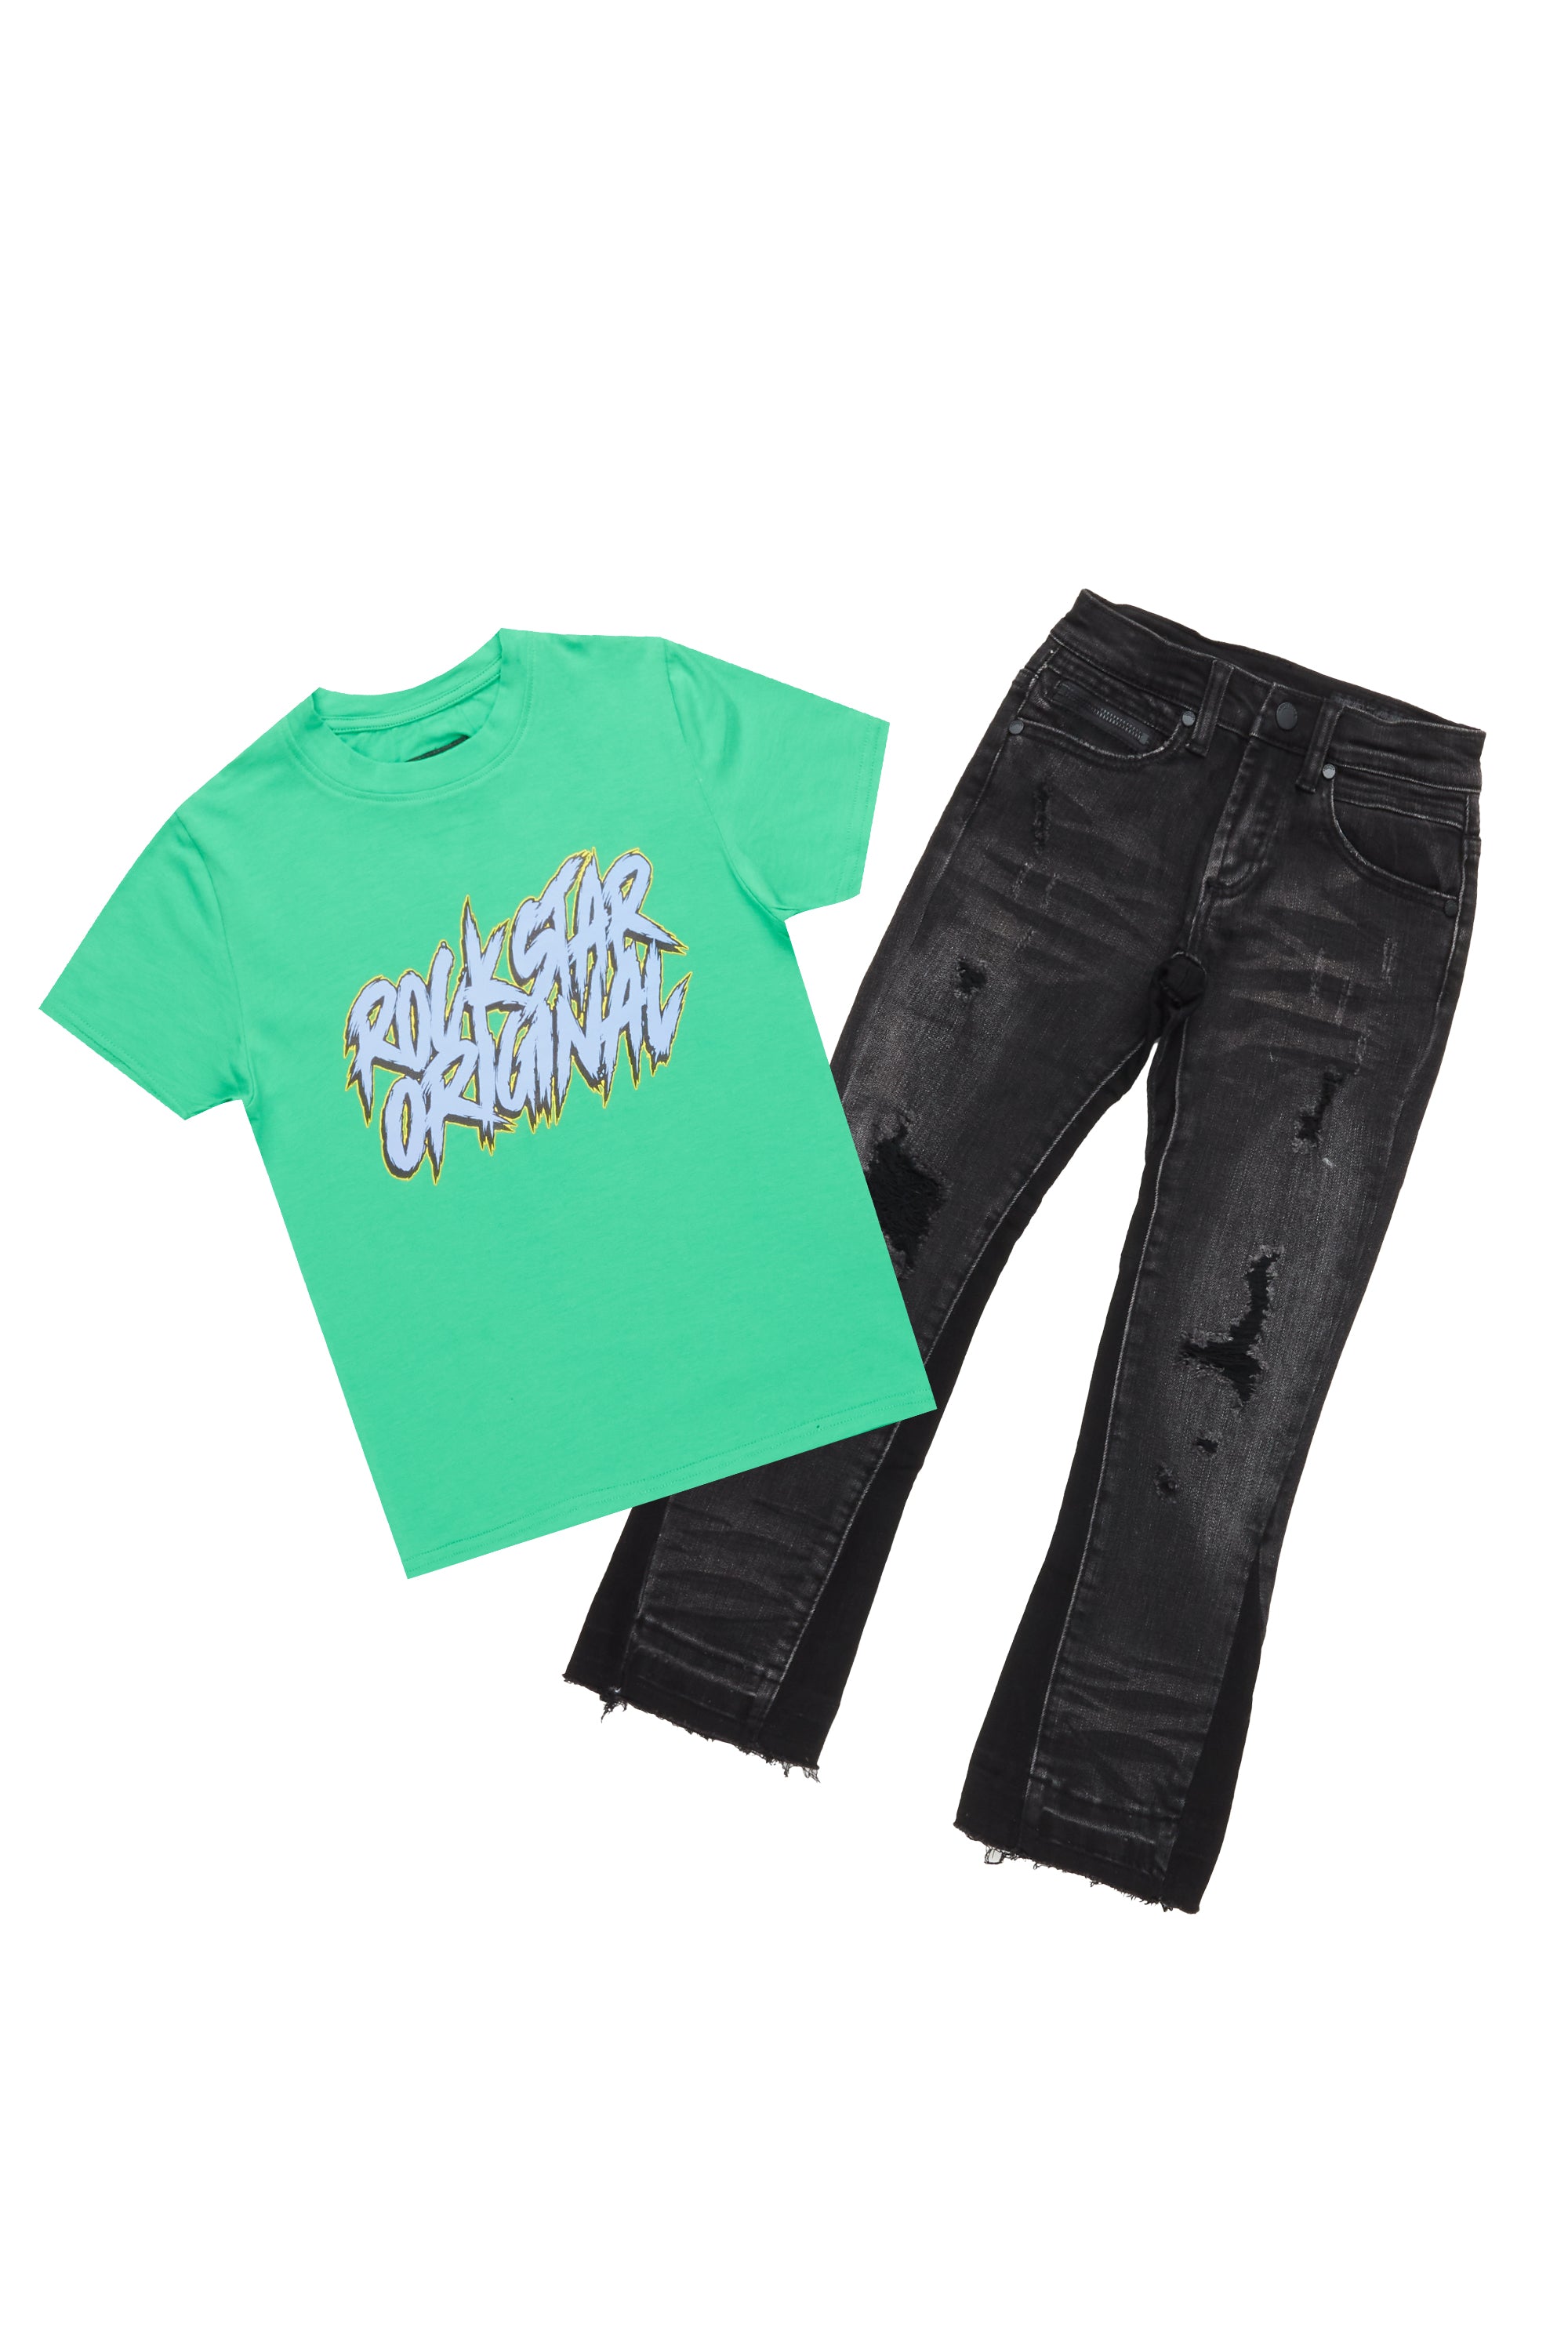 Boys Toshi Green/Black T-Shirt/Stacked Flare Jean Set